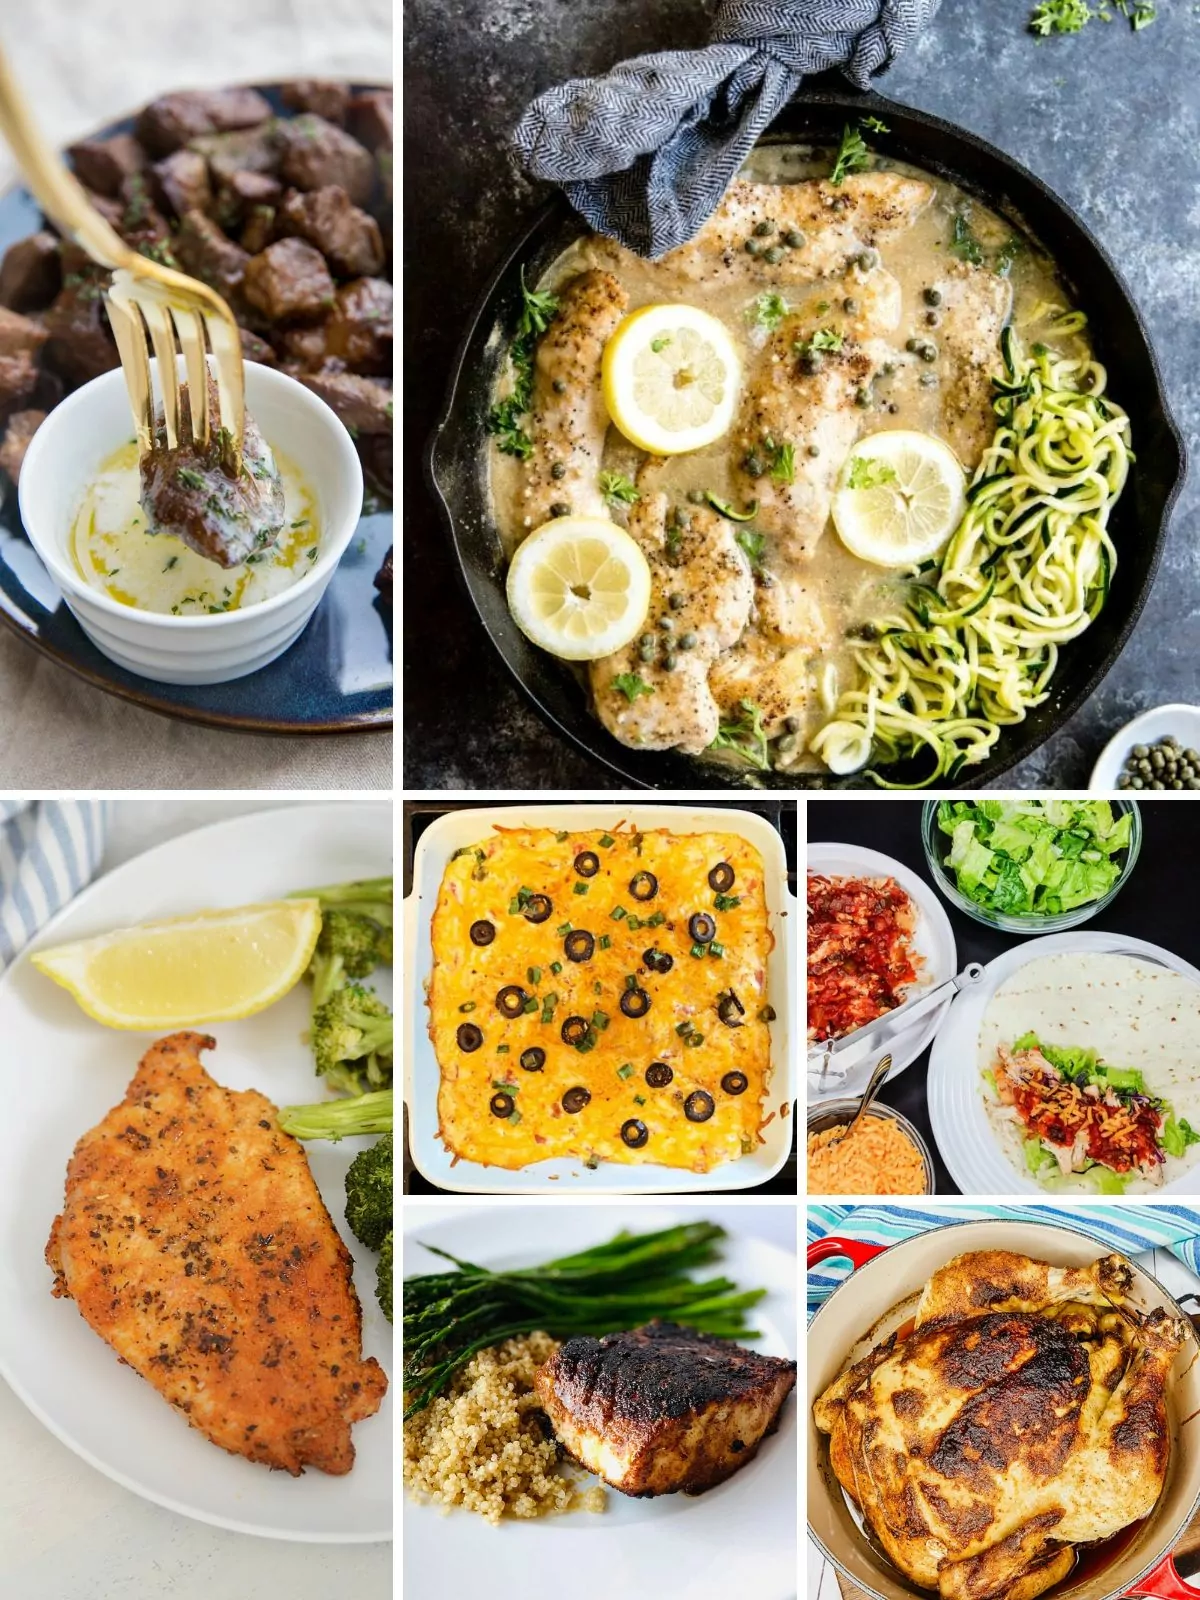 A collection of keto recipes used for a meal plan.